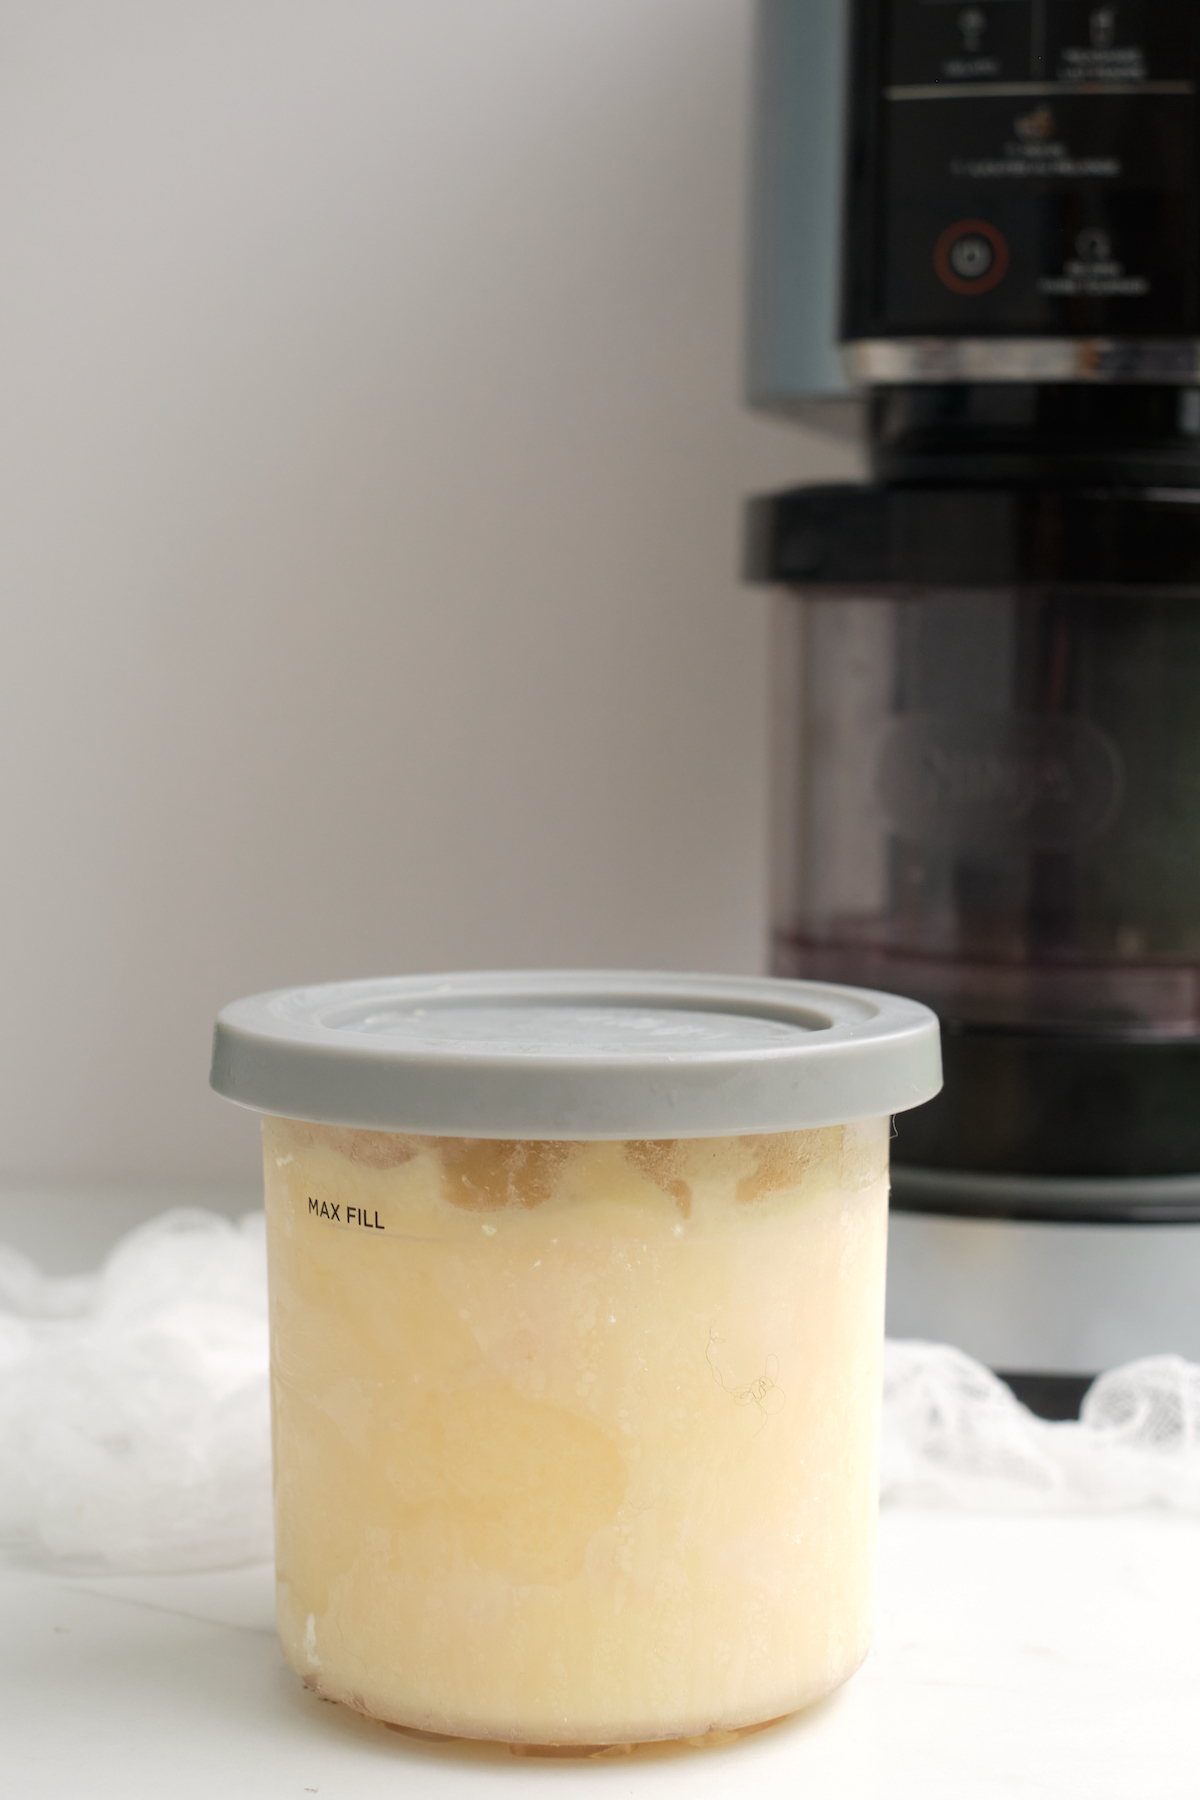 a pint container of pineapple sorbet placed in front of the Ninja Creami machine.